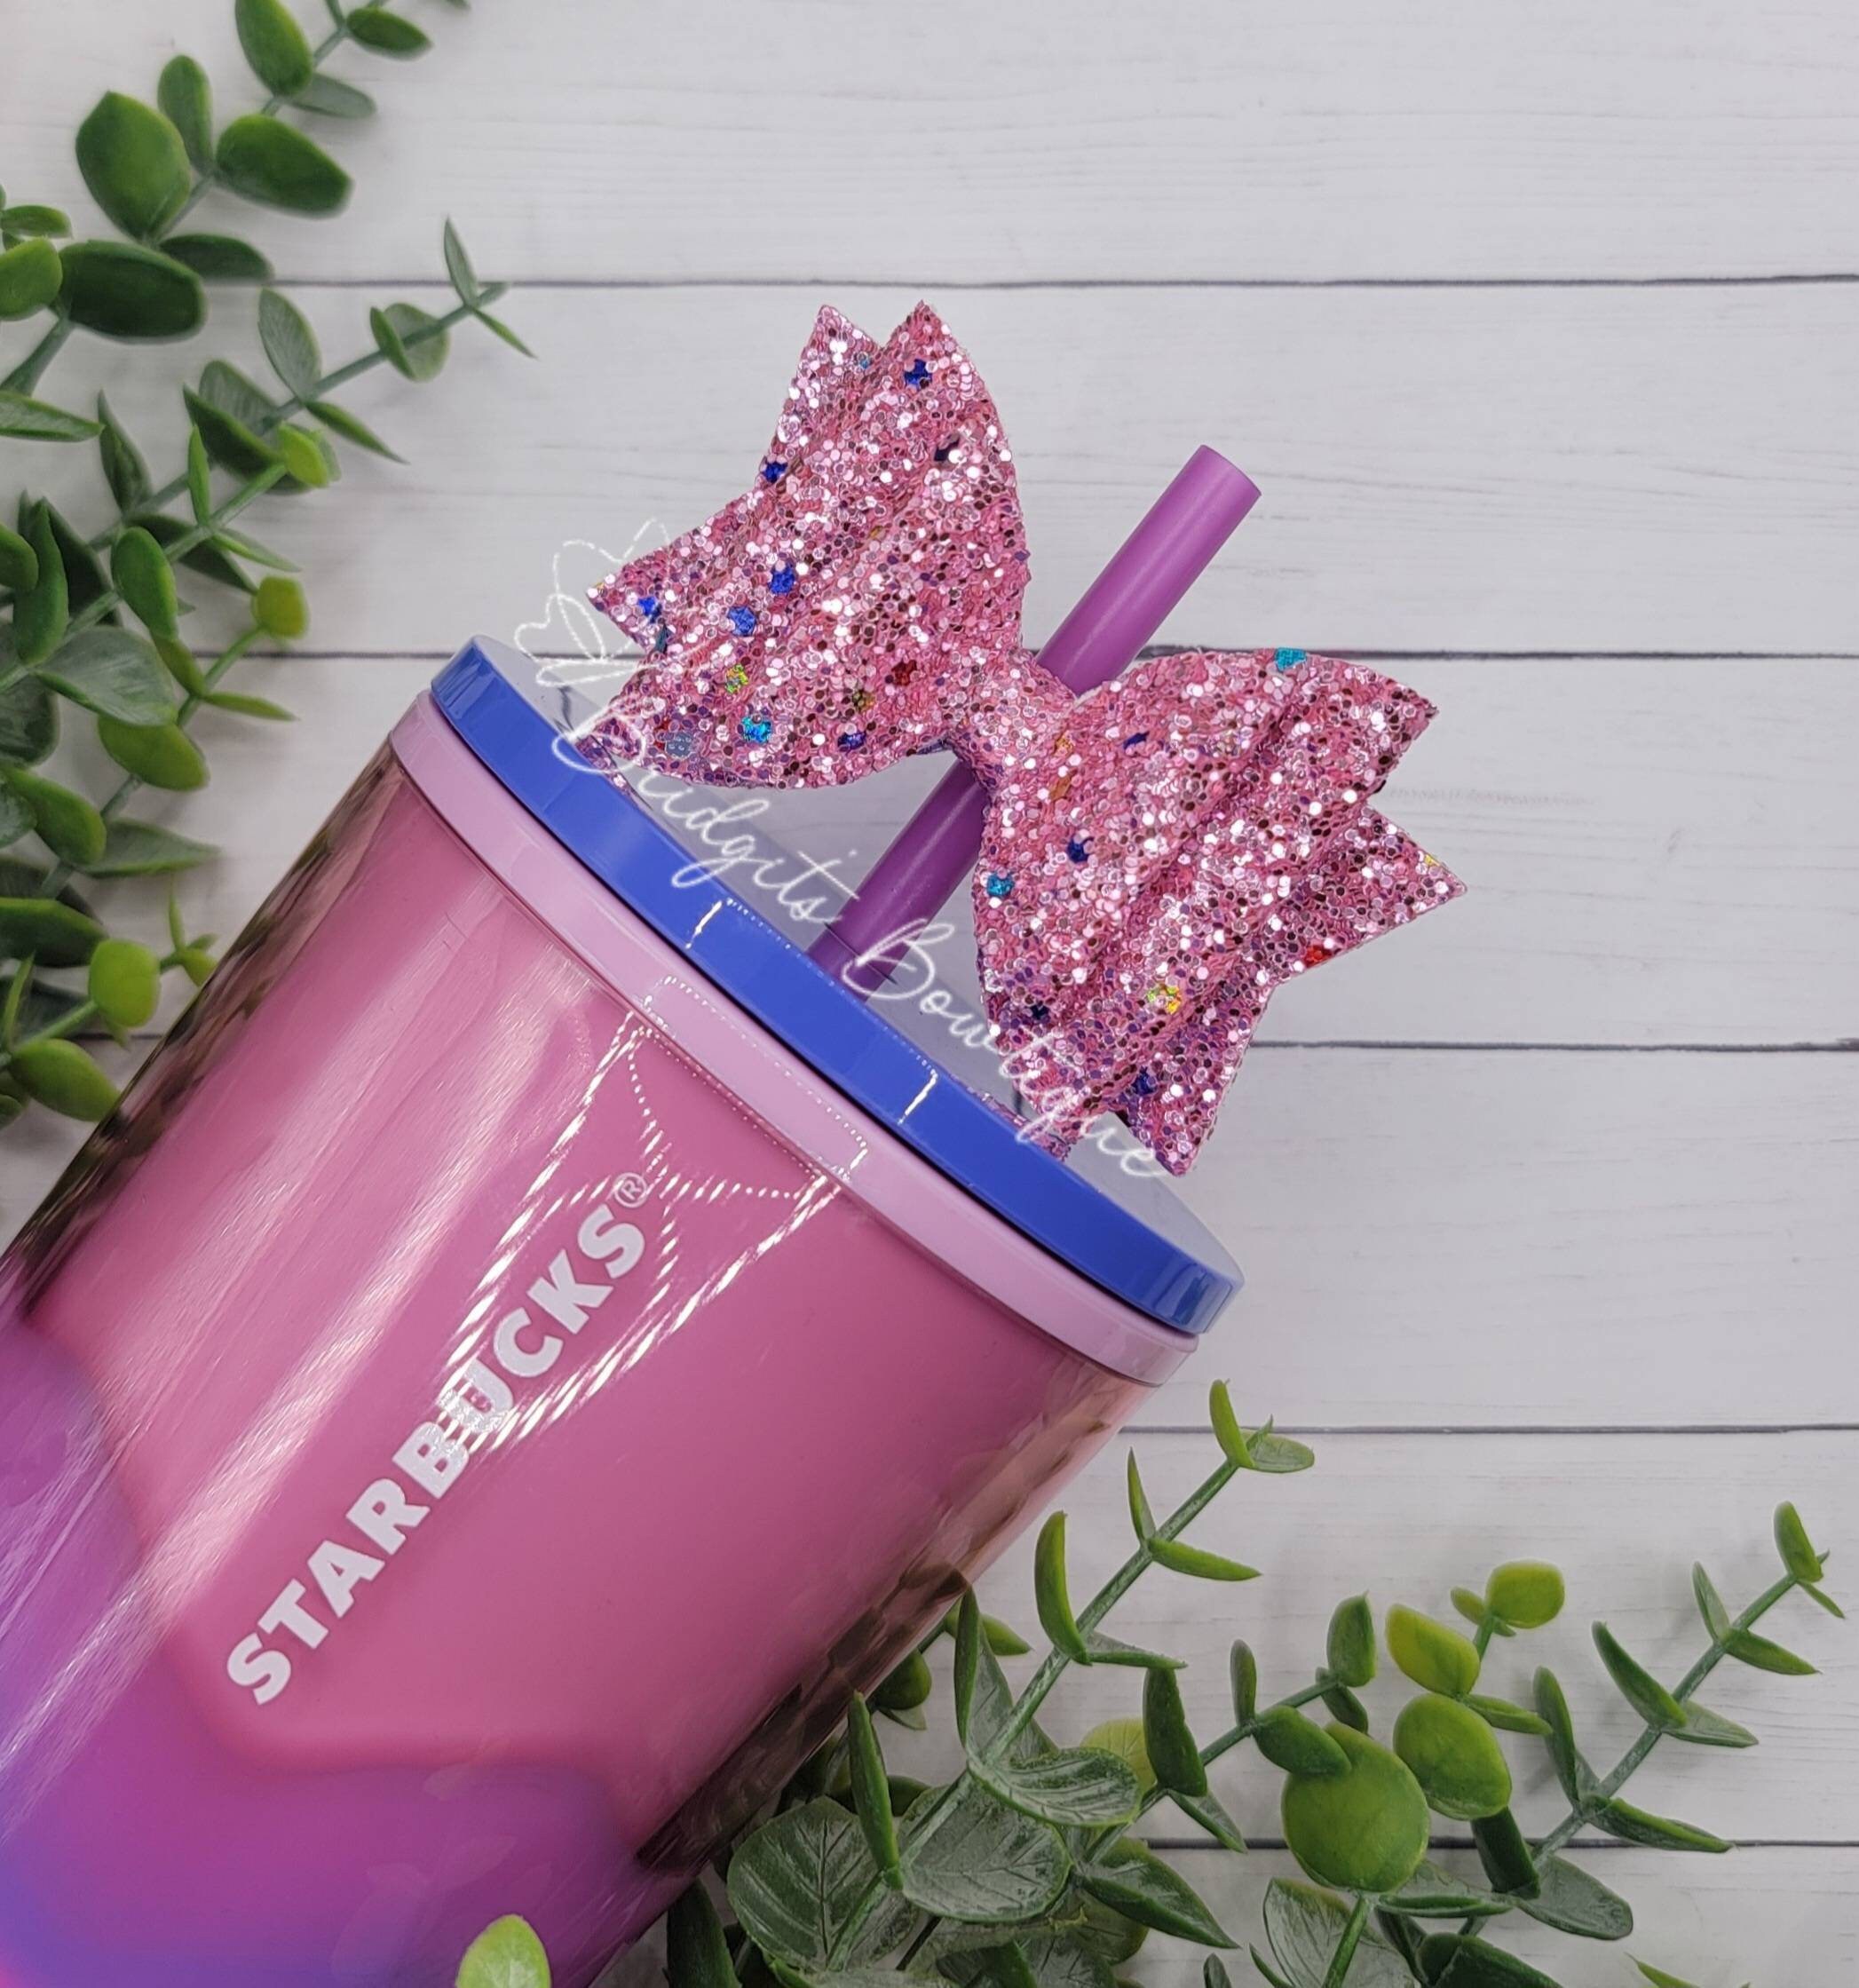 Pink Barb Rhinestone Tumbler with Straw Glitter Bow Inspired